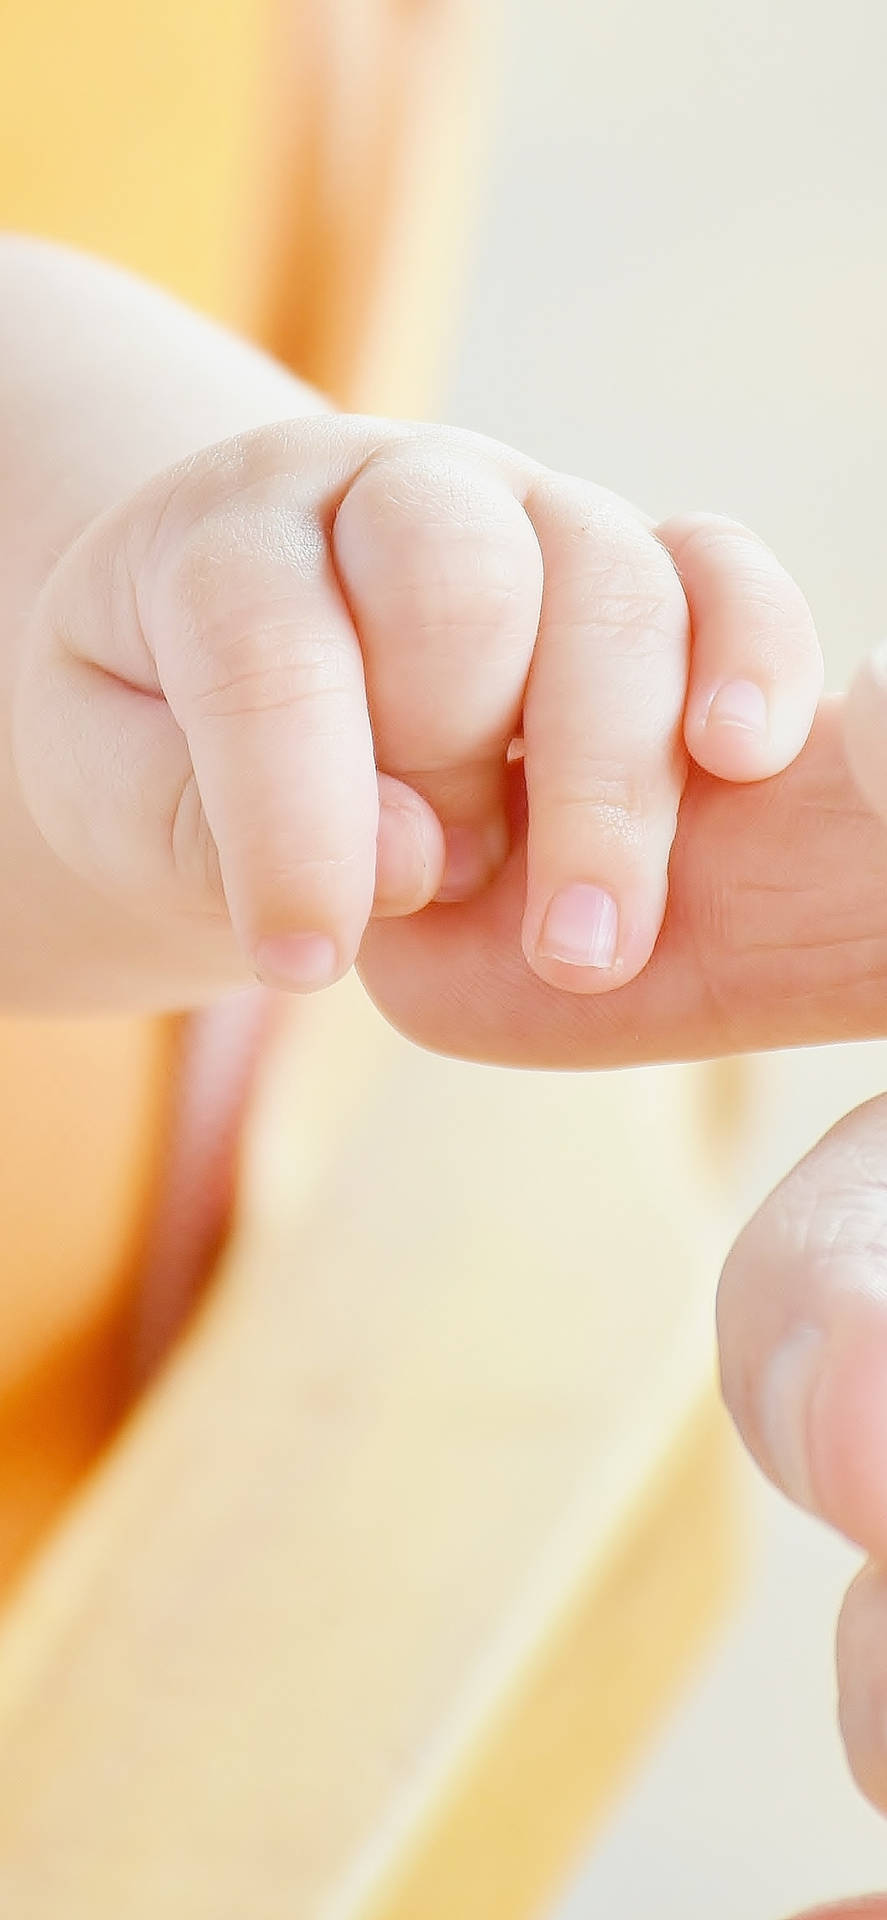 A Gentle Touch of Love - Baby Hand Holding an Adult Finger Wallpaper